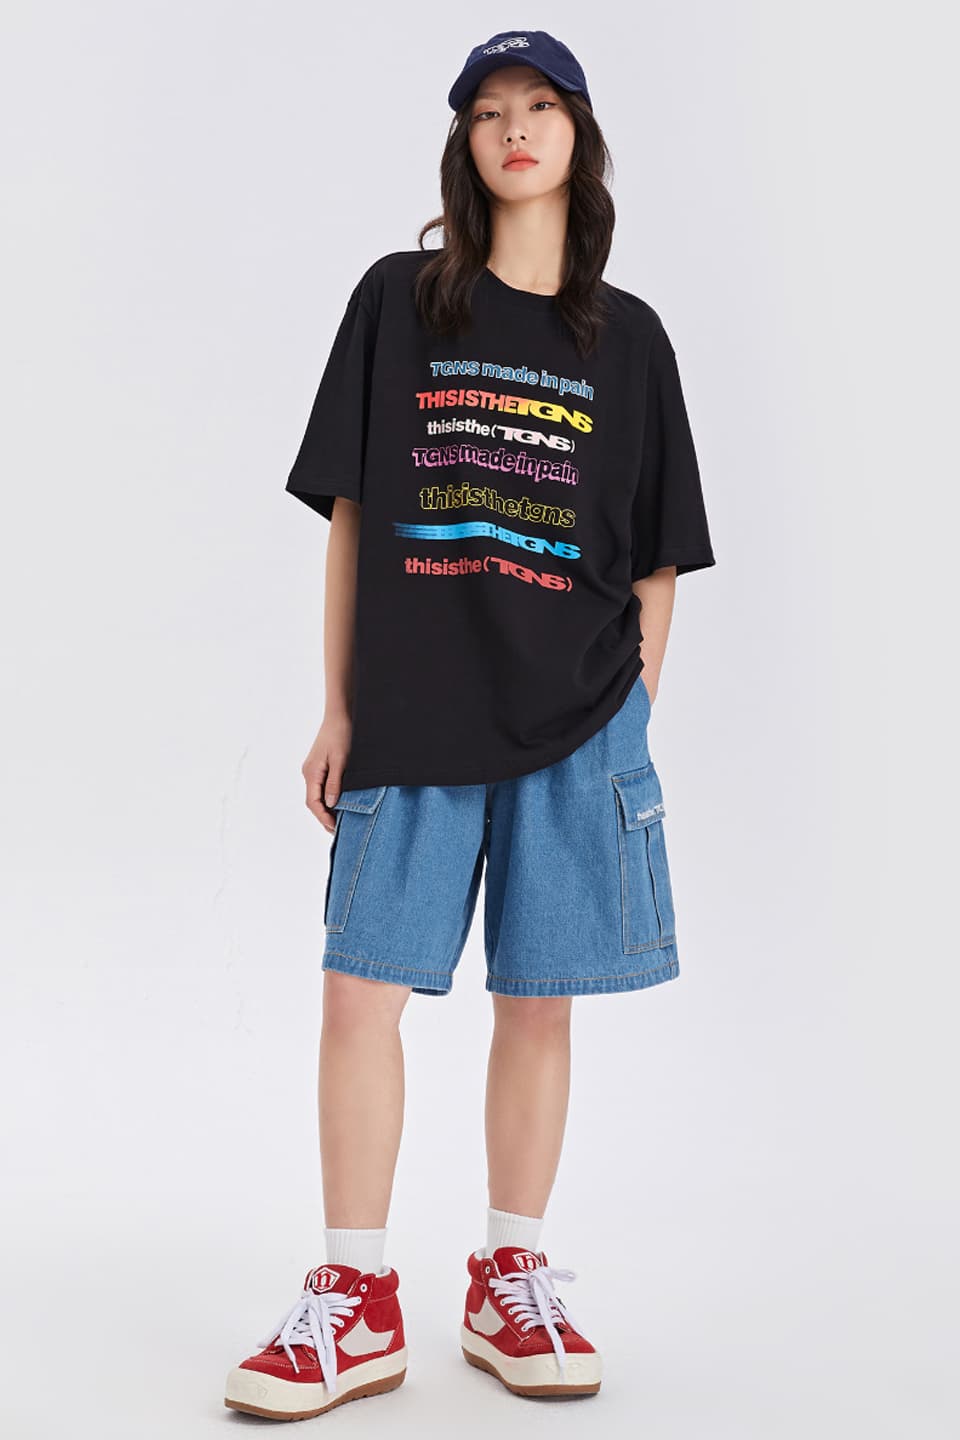 Tシャツ｜TGNS (トゥーガンズ)｜Font Tee｜公式通販 - SUPPLIER